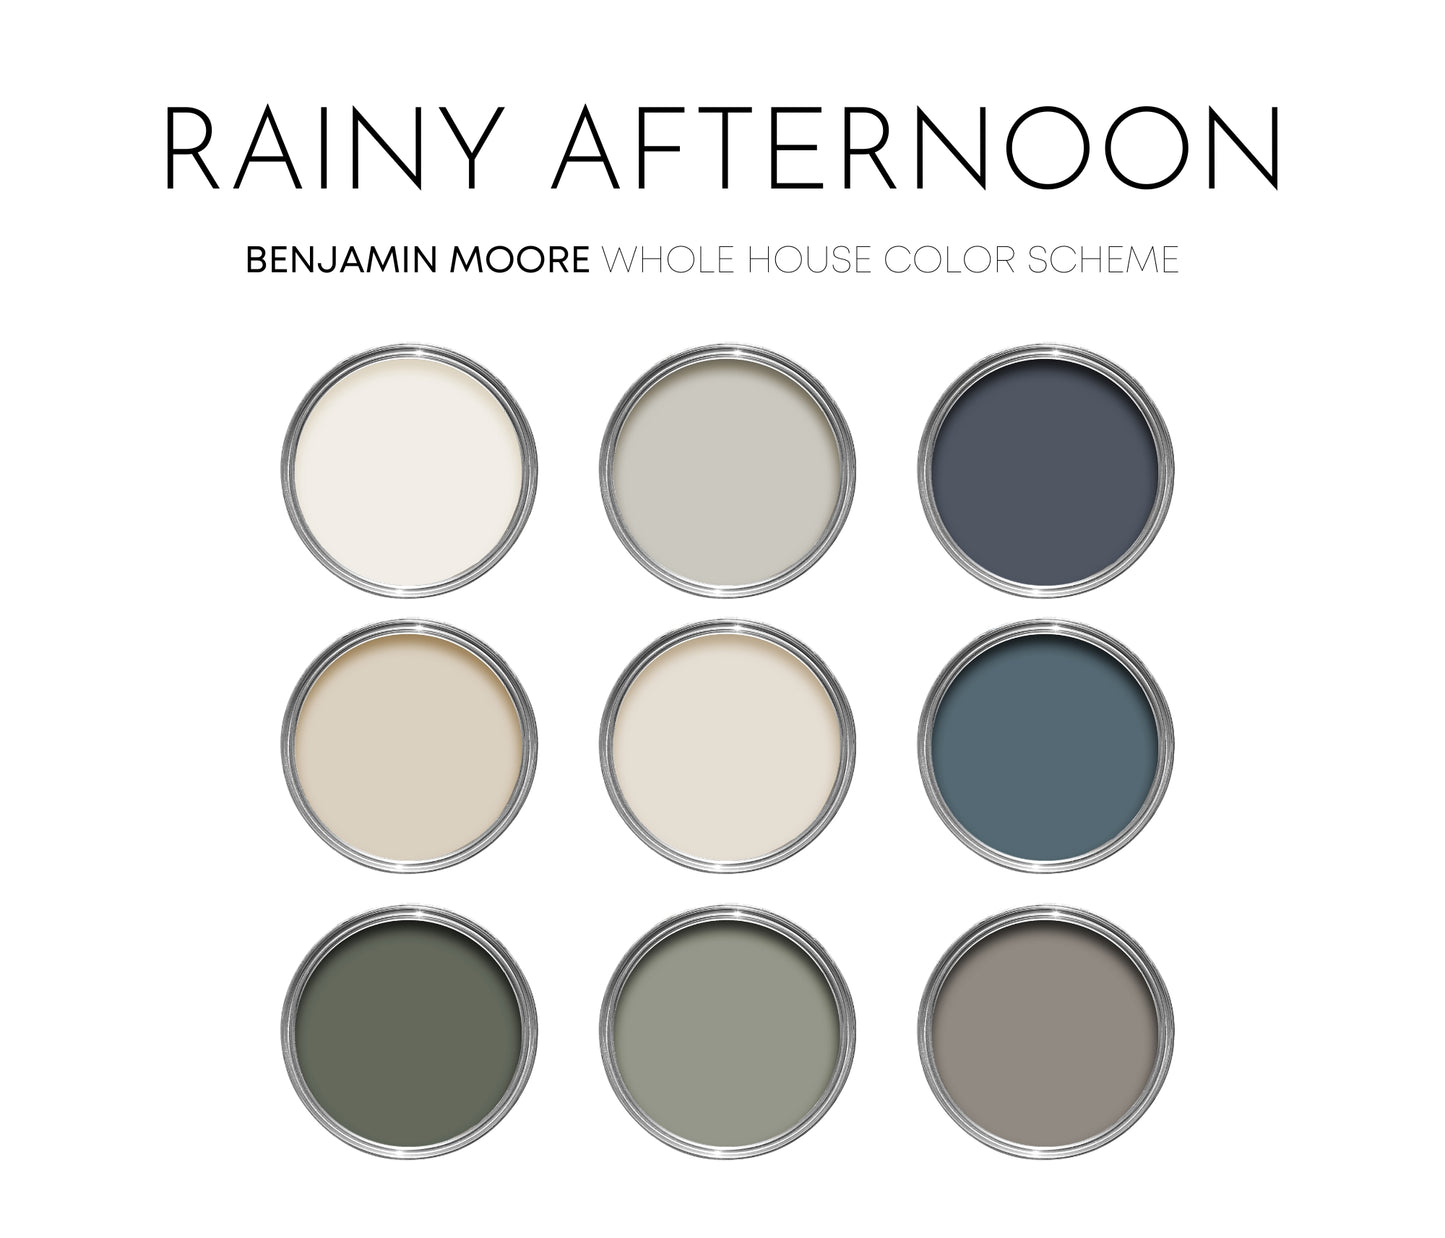 Rainy Afternoon Benjamin Moore Paint Palette, Modern Neutral Interior Paint Colors for Home, Rainy Afternoon Compliments, Warm Whites, White Dove